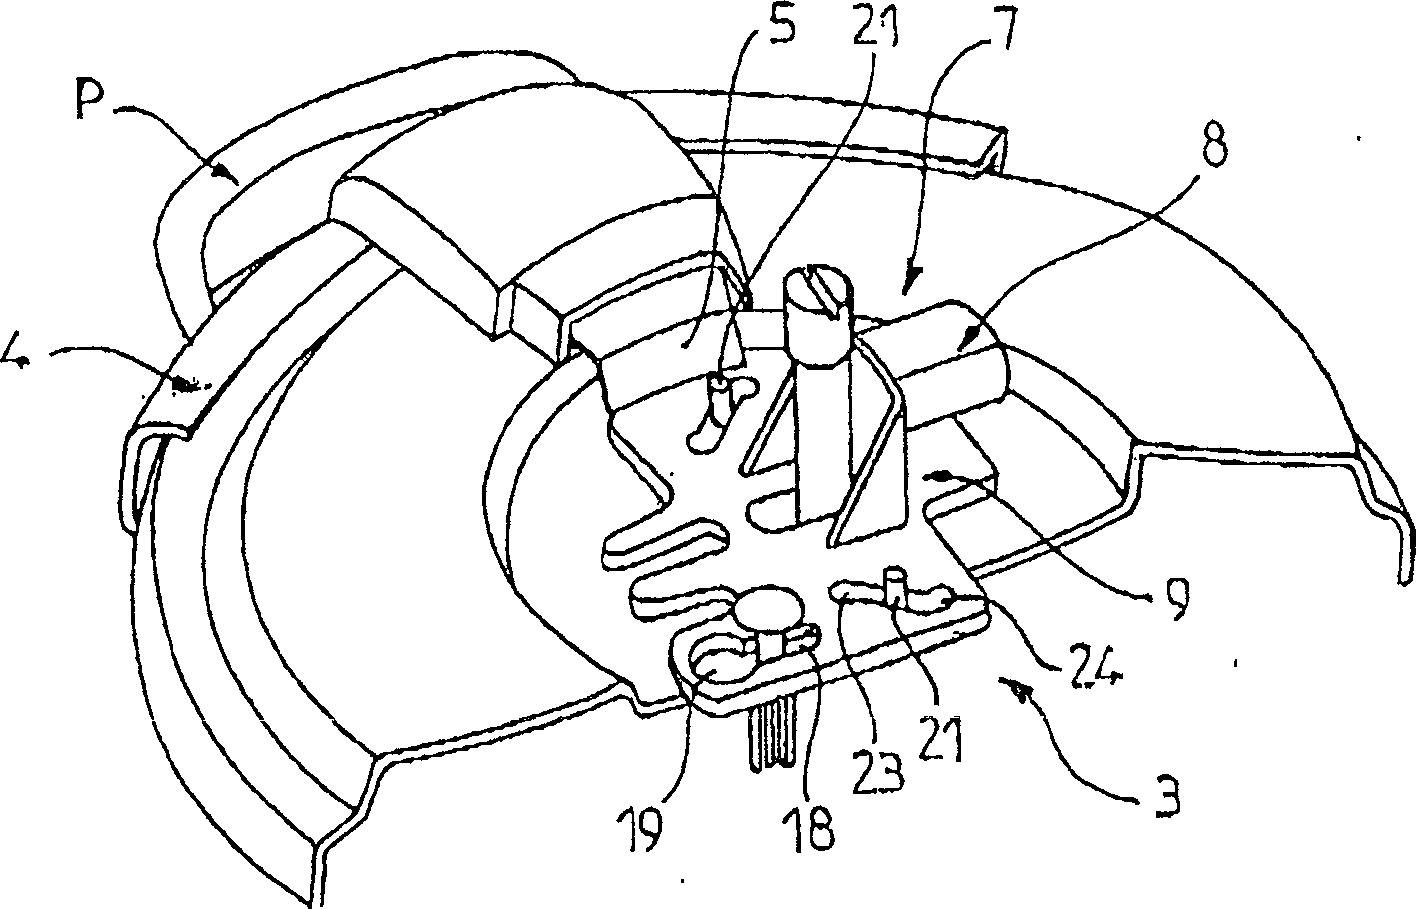 Domestic pressure cooking appliance with improved locking device